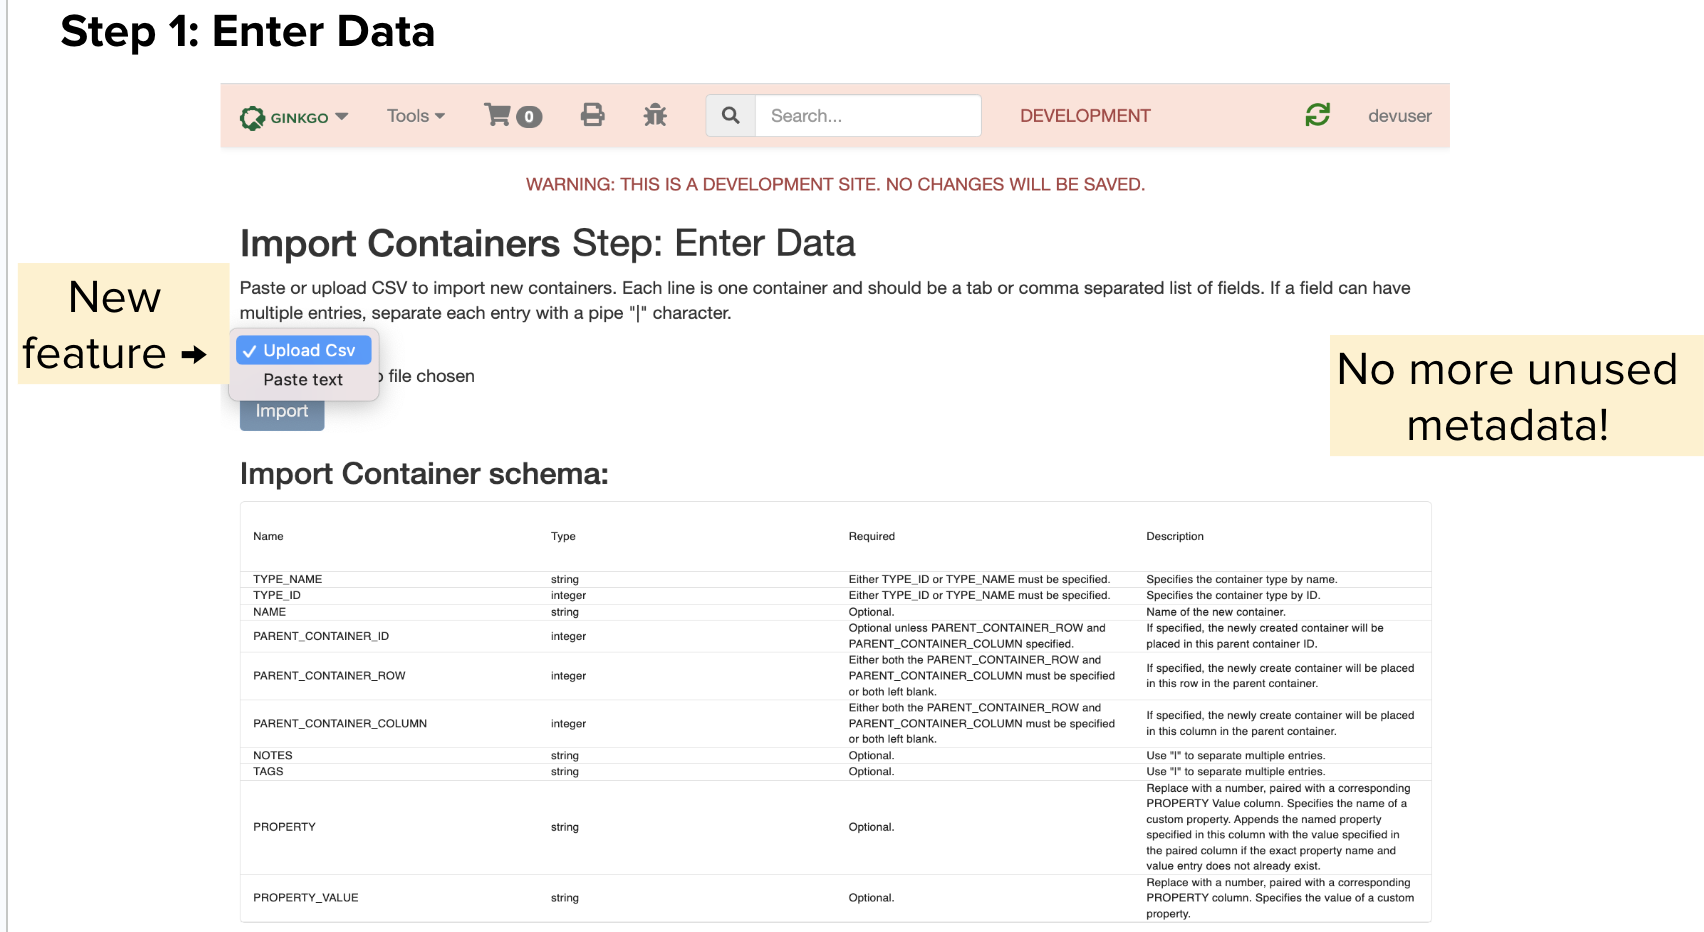 LIMS container import step 1 screenshot